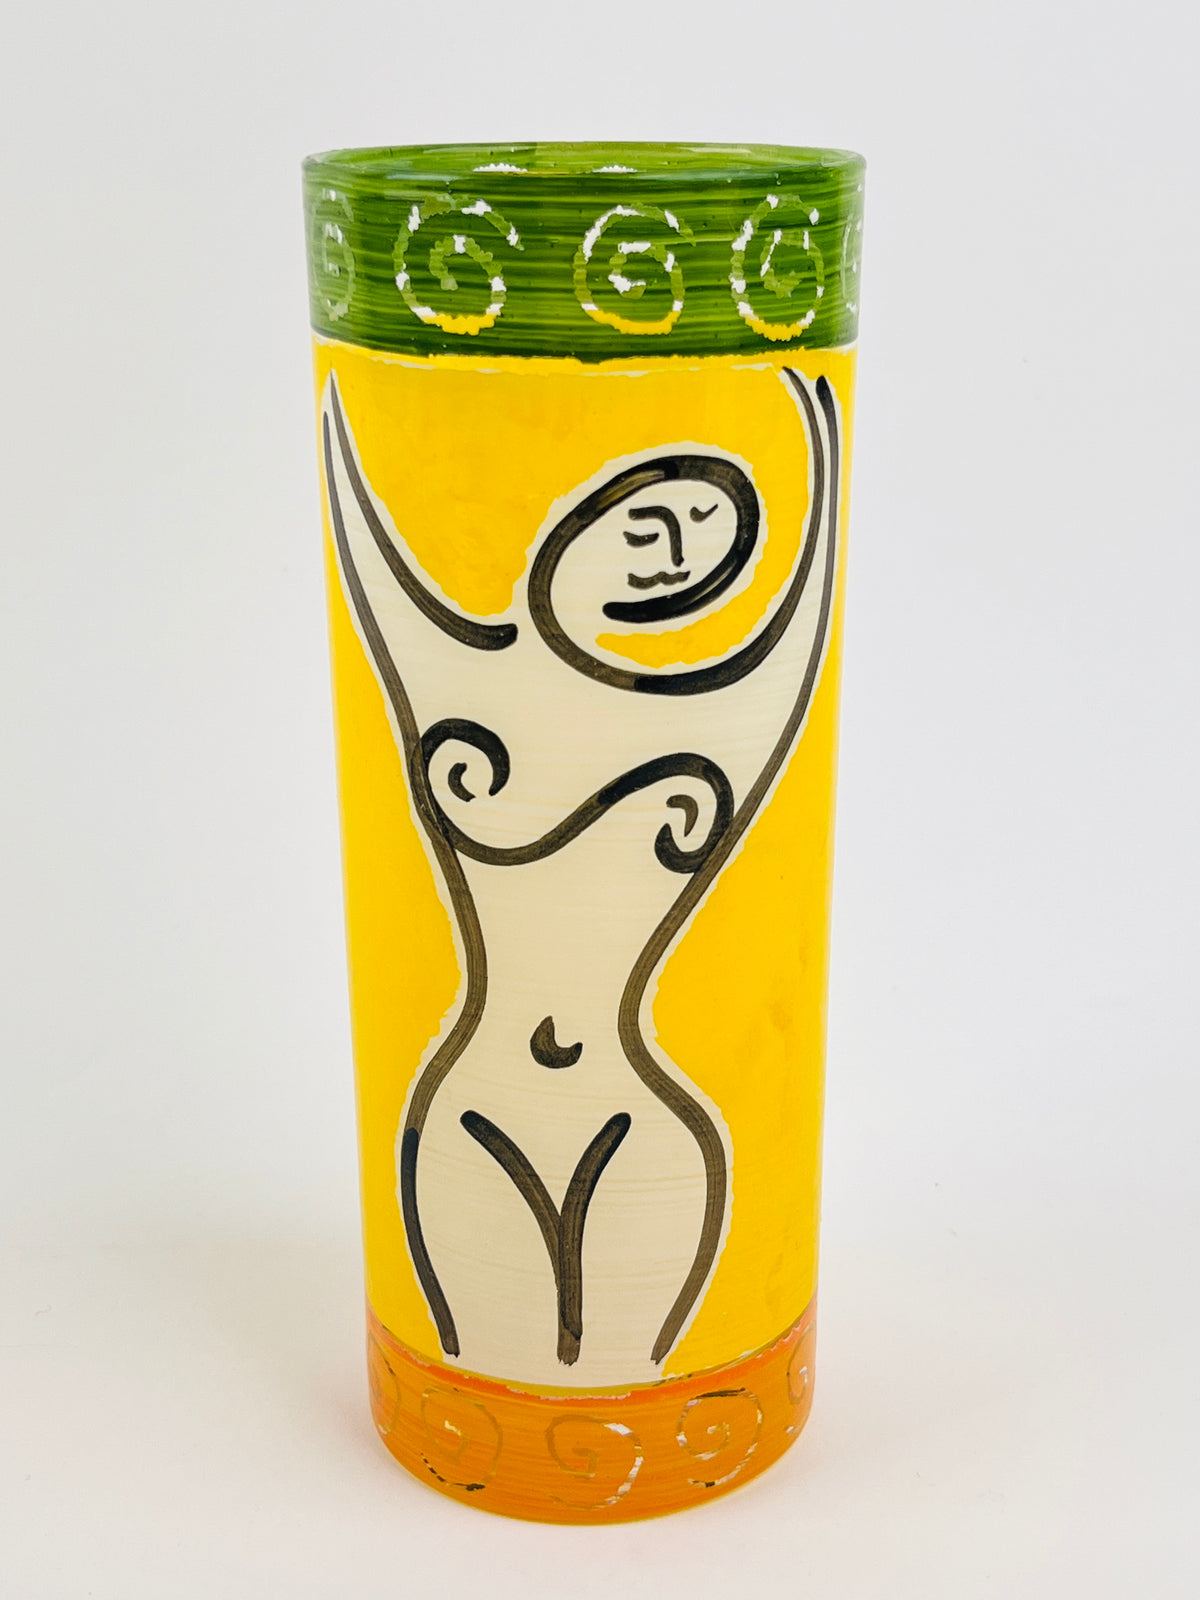 90s Hand-Painted Figurative Glasses